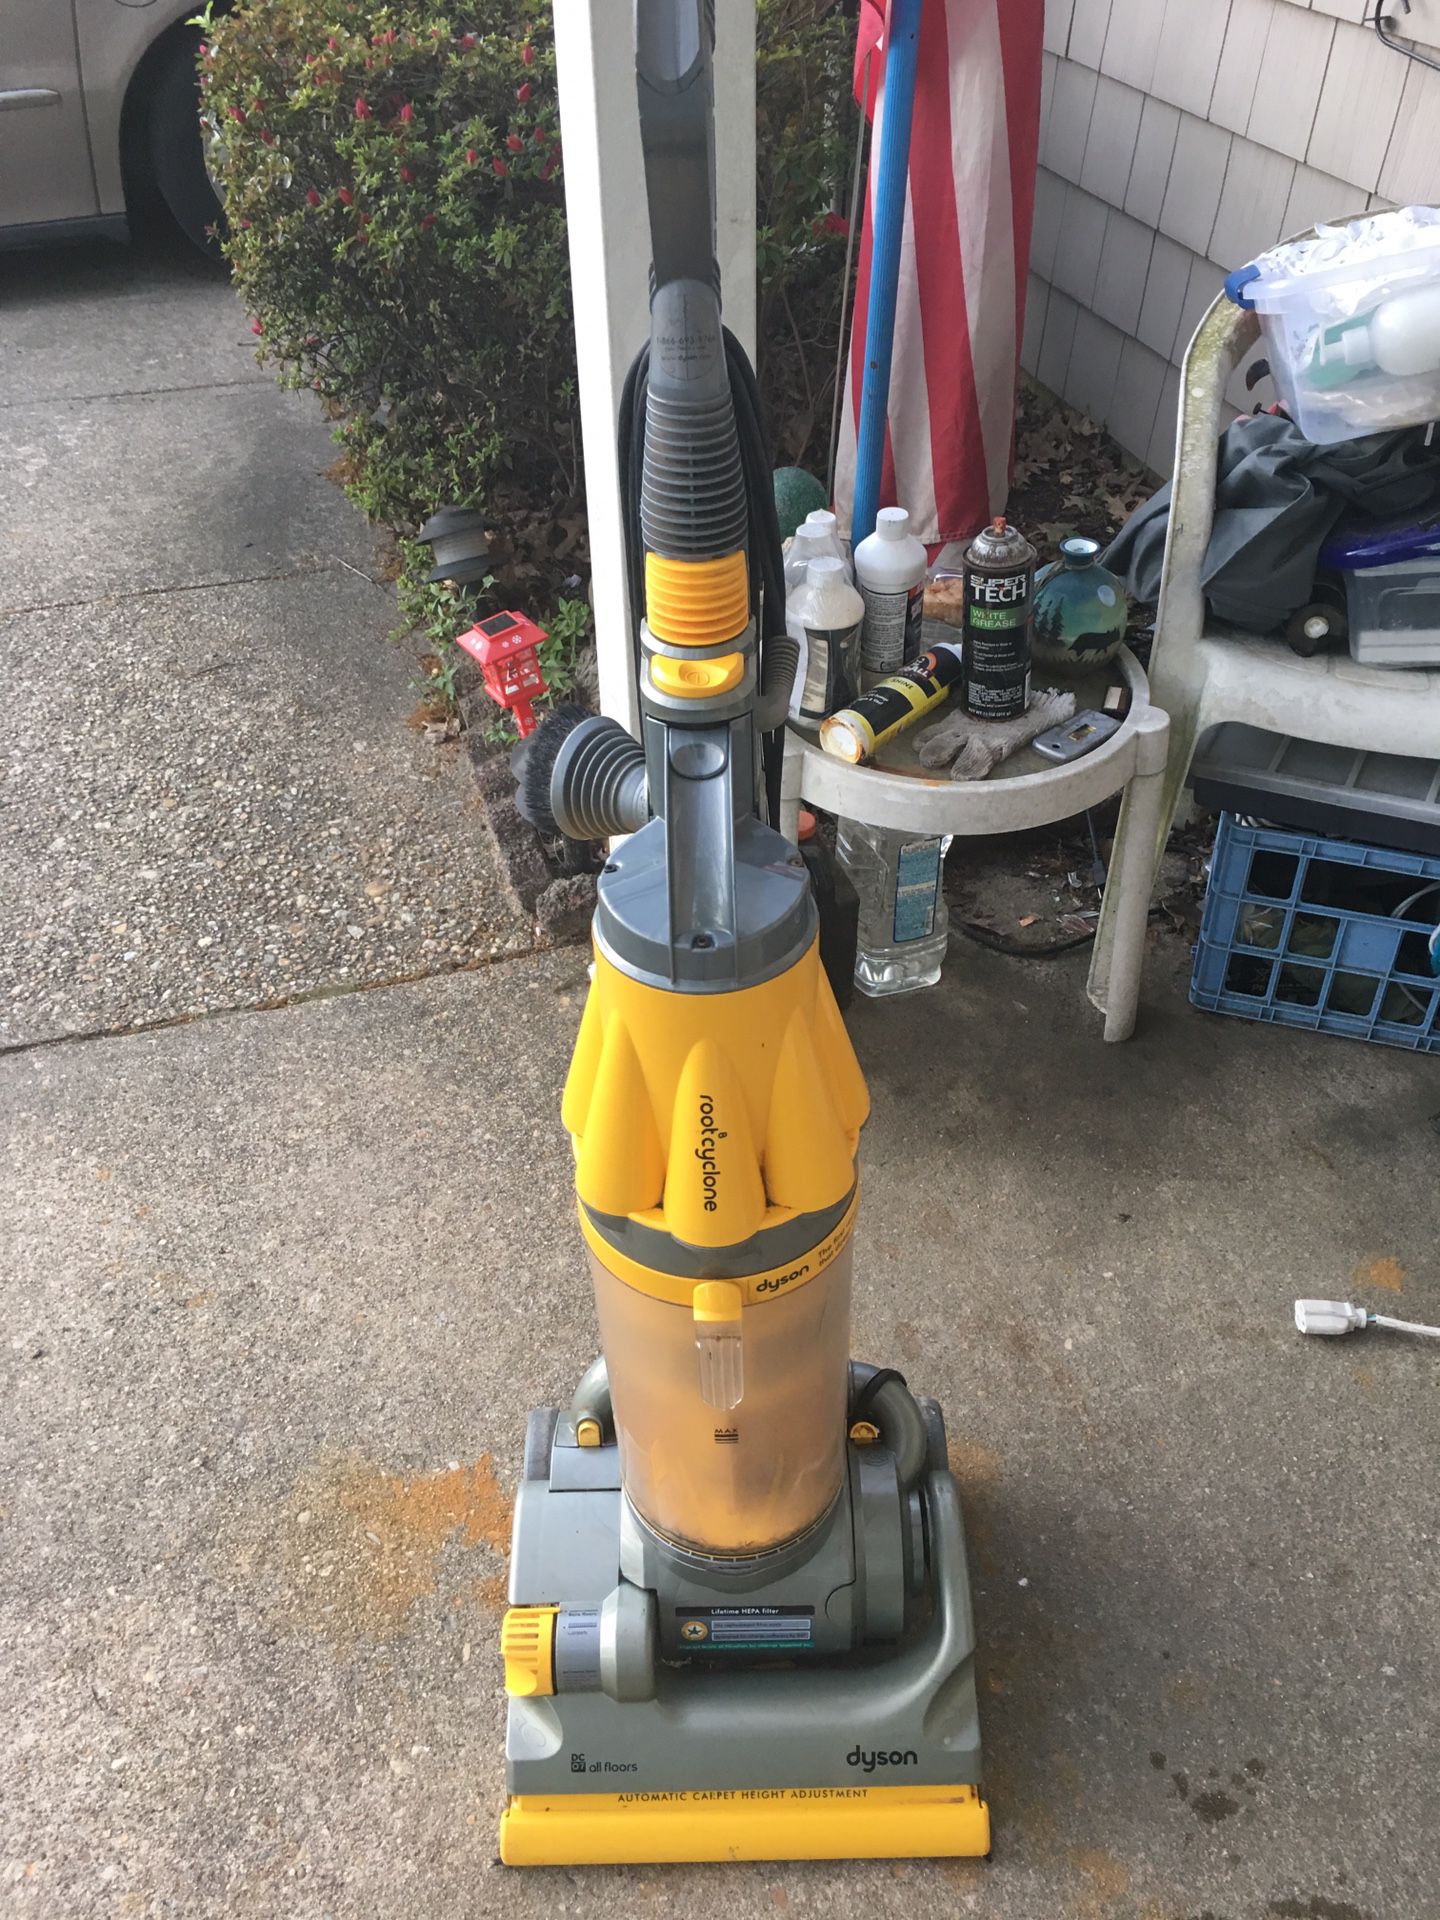 DYSON ROOTCYCLONE VAC GREAT CONDITION only 75 FIRM